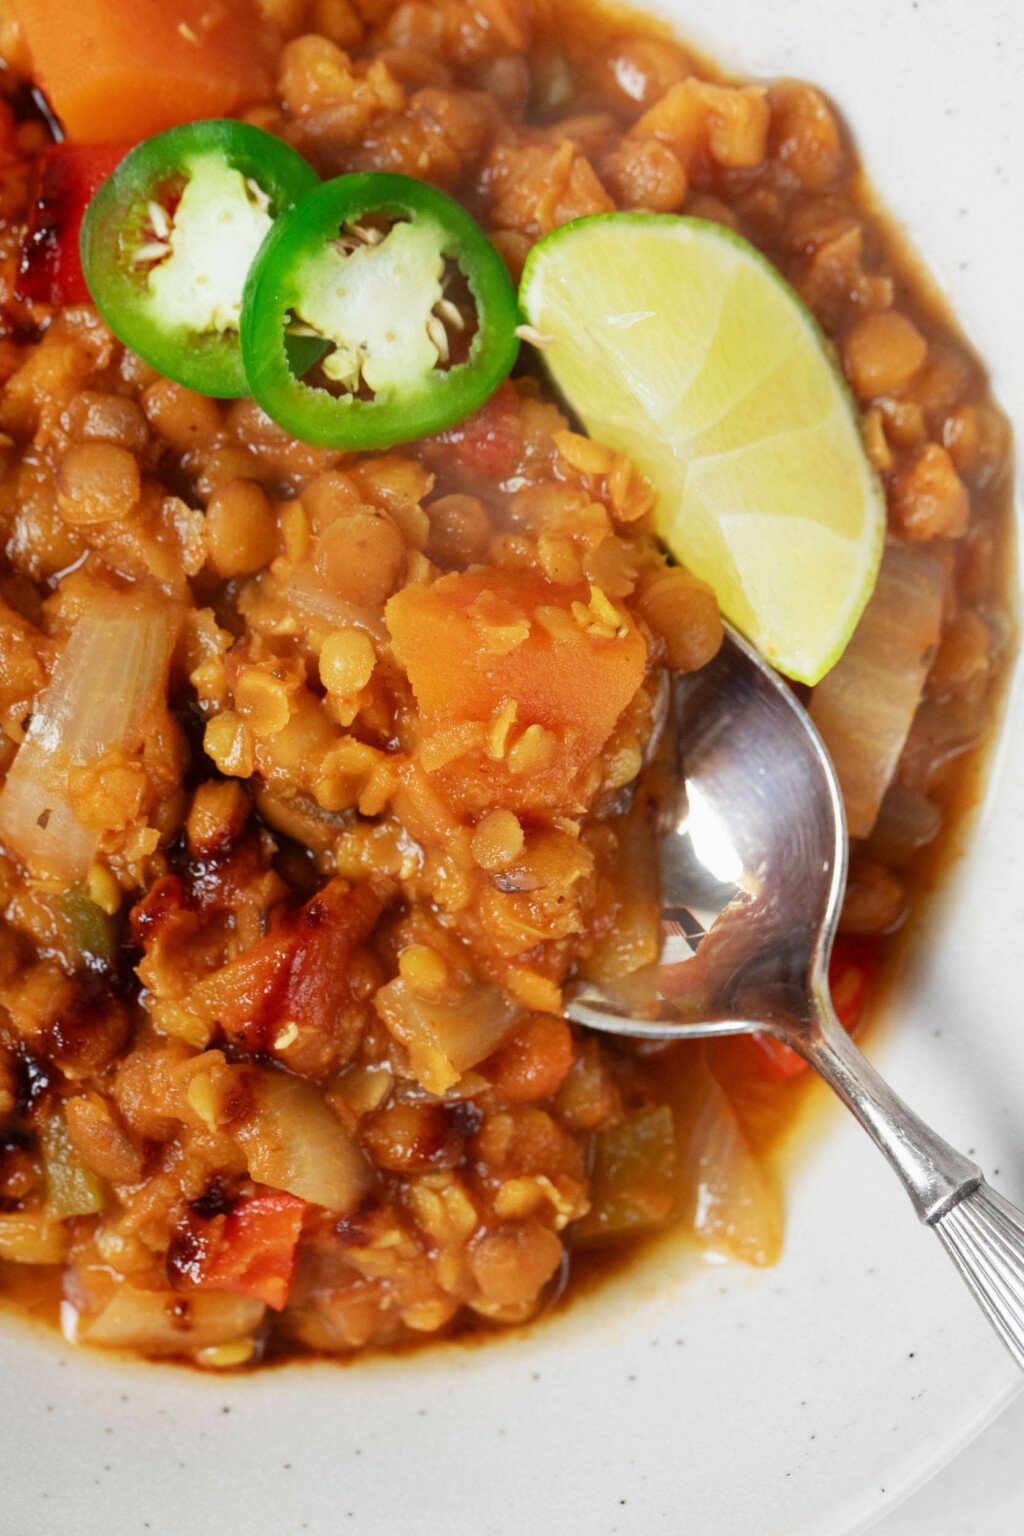 An overhead, close-up image of an orange-hued lentil chili that's being eaten with a spoon.